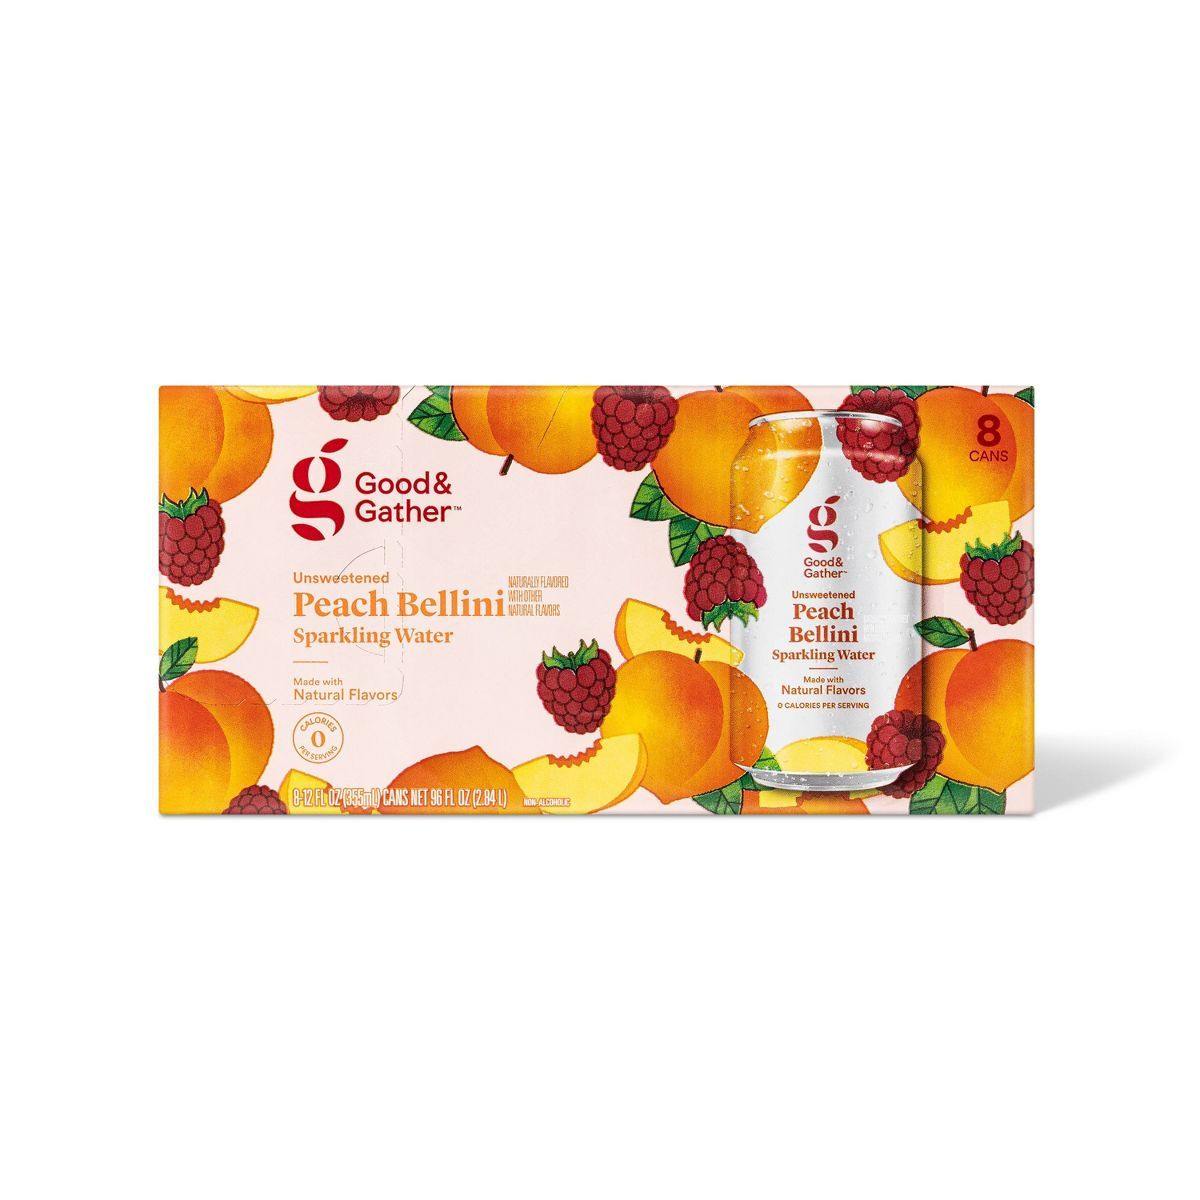 Peach Bellini Unsweetened Sparkling Water - 8pk/12 fl oz Cans - Good & Gather™ | Target